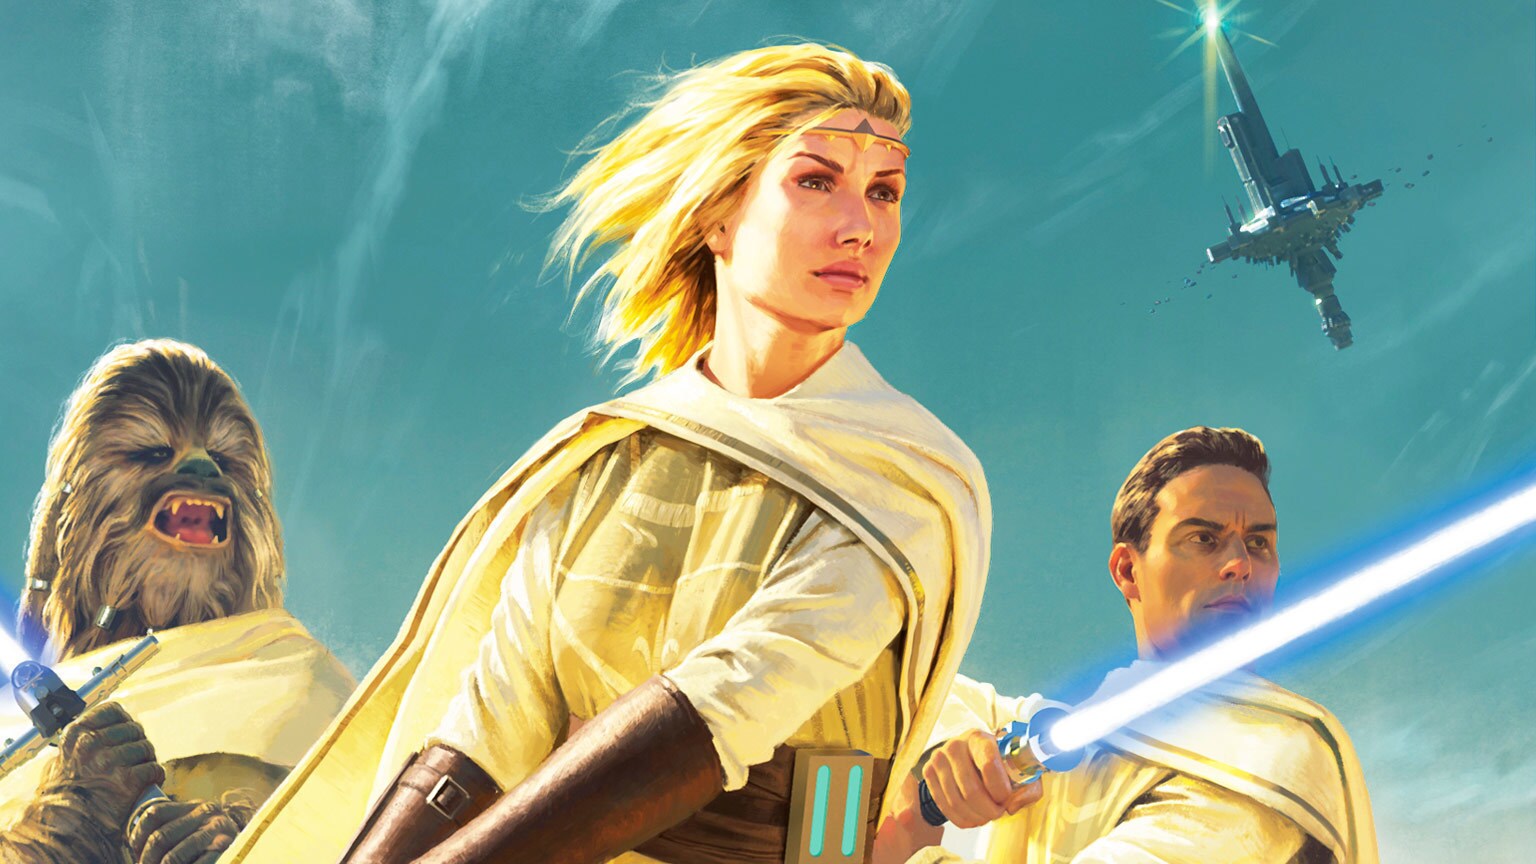 Explore Light of the Jedi in Star Wars: The High Republic - Exclusive Excerpt